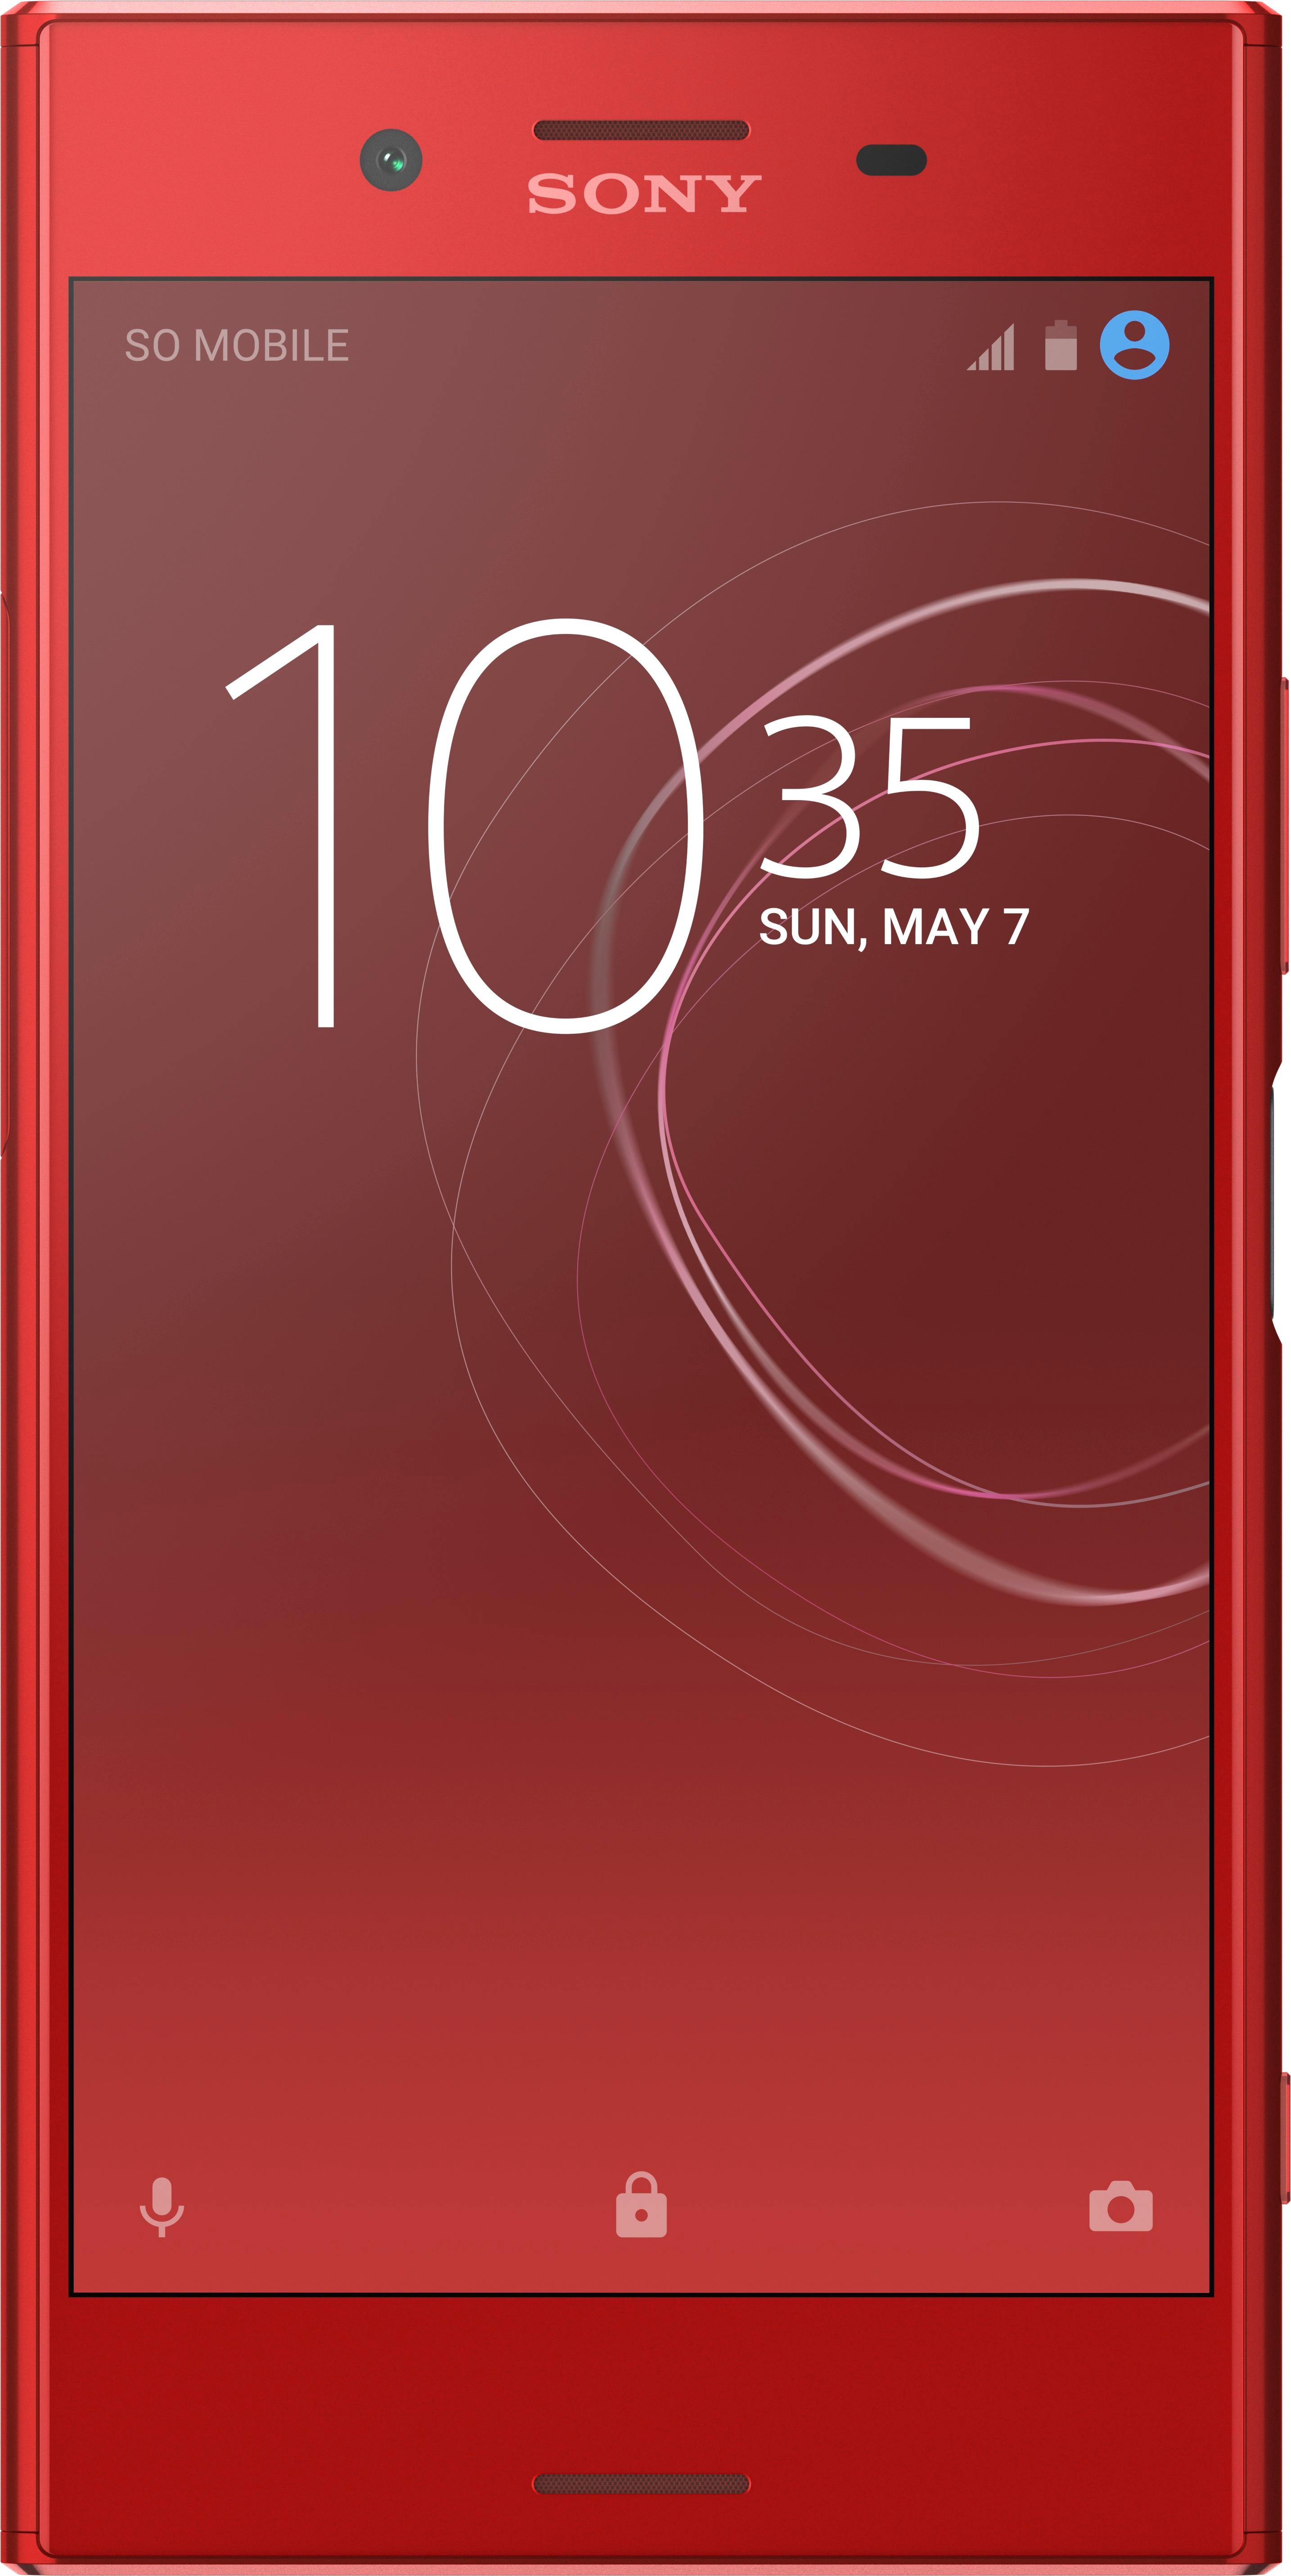 Sony Xperia Xz Premium 4g Lte With 64gb Memory Cell Phone Unlocked Rosso G8142 Best Buy